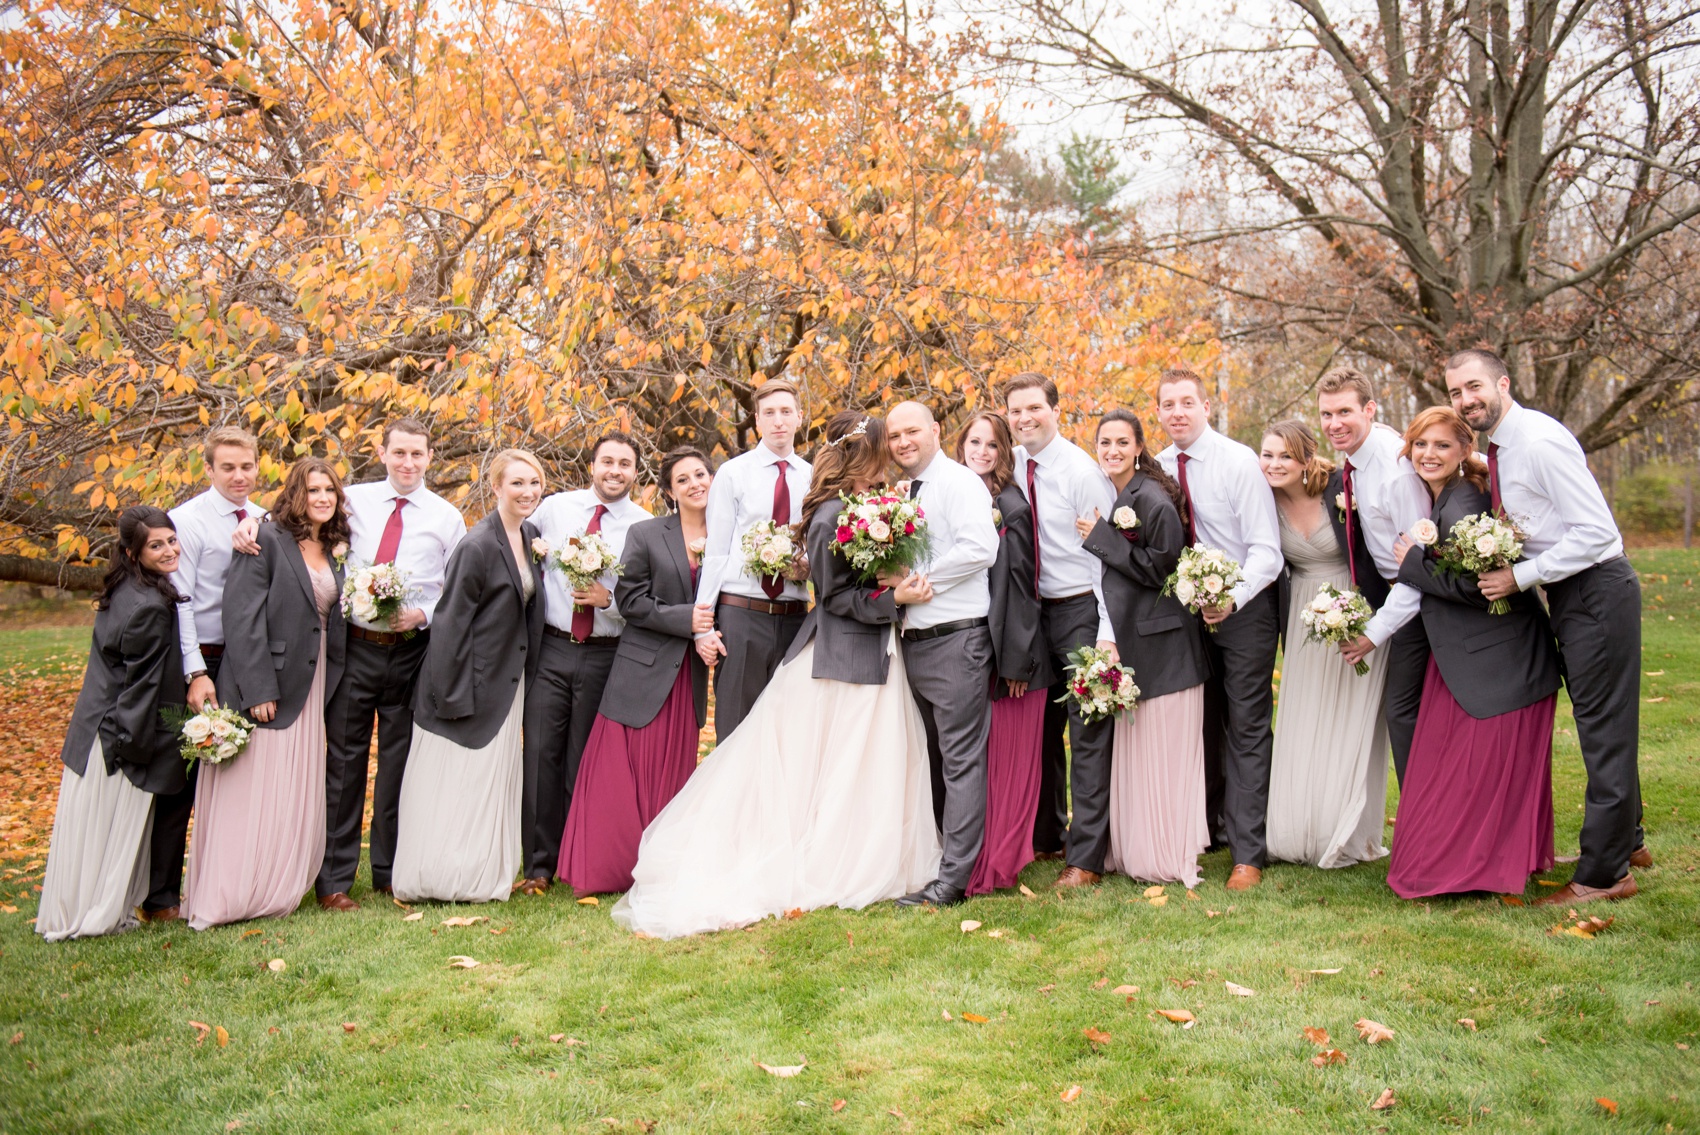 Olde Mill Inn New Jersey wedding by Mikkel Paige Photography, NYC and Raleigh wedding photographer. Creative bridal wedding party fall photos with burgundy, grey and dusty rose gowns.